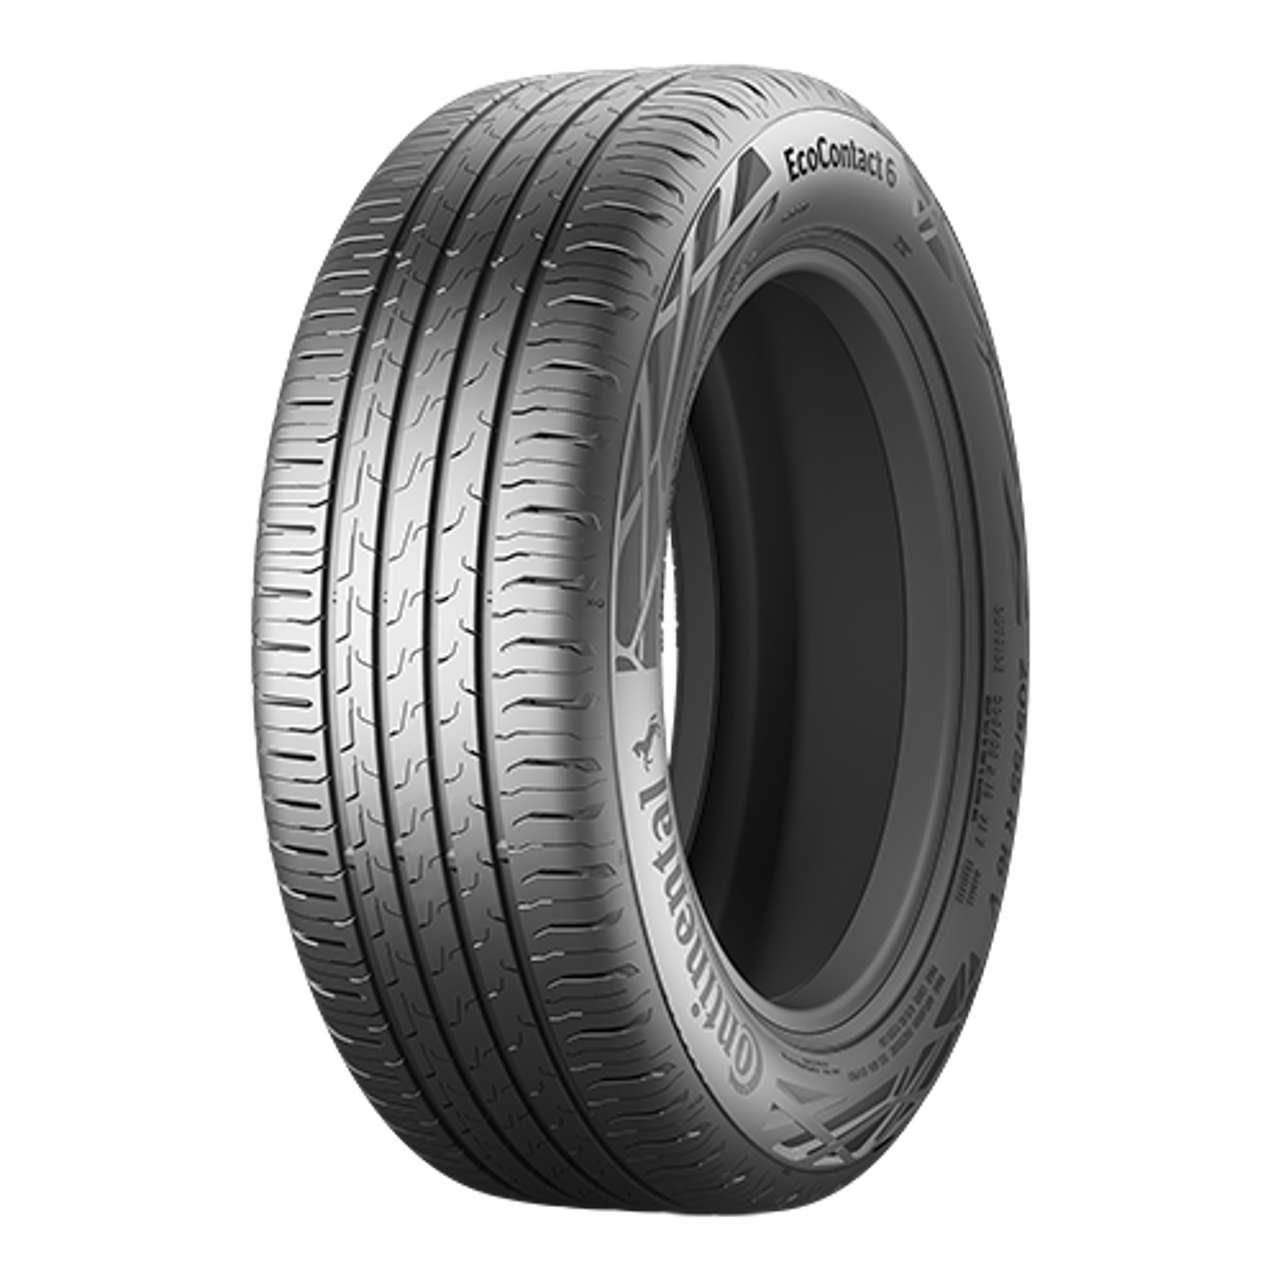 CONTINENTAL ECOCONTACT 6Q (*) (MO) (EVc) 275/35R20 102Y FR BSW von Continental